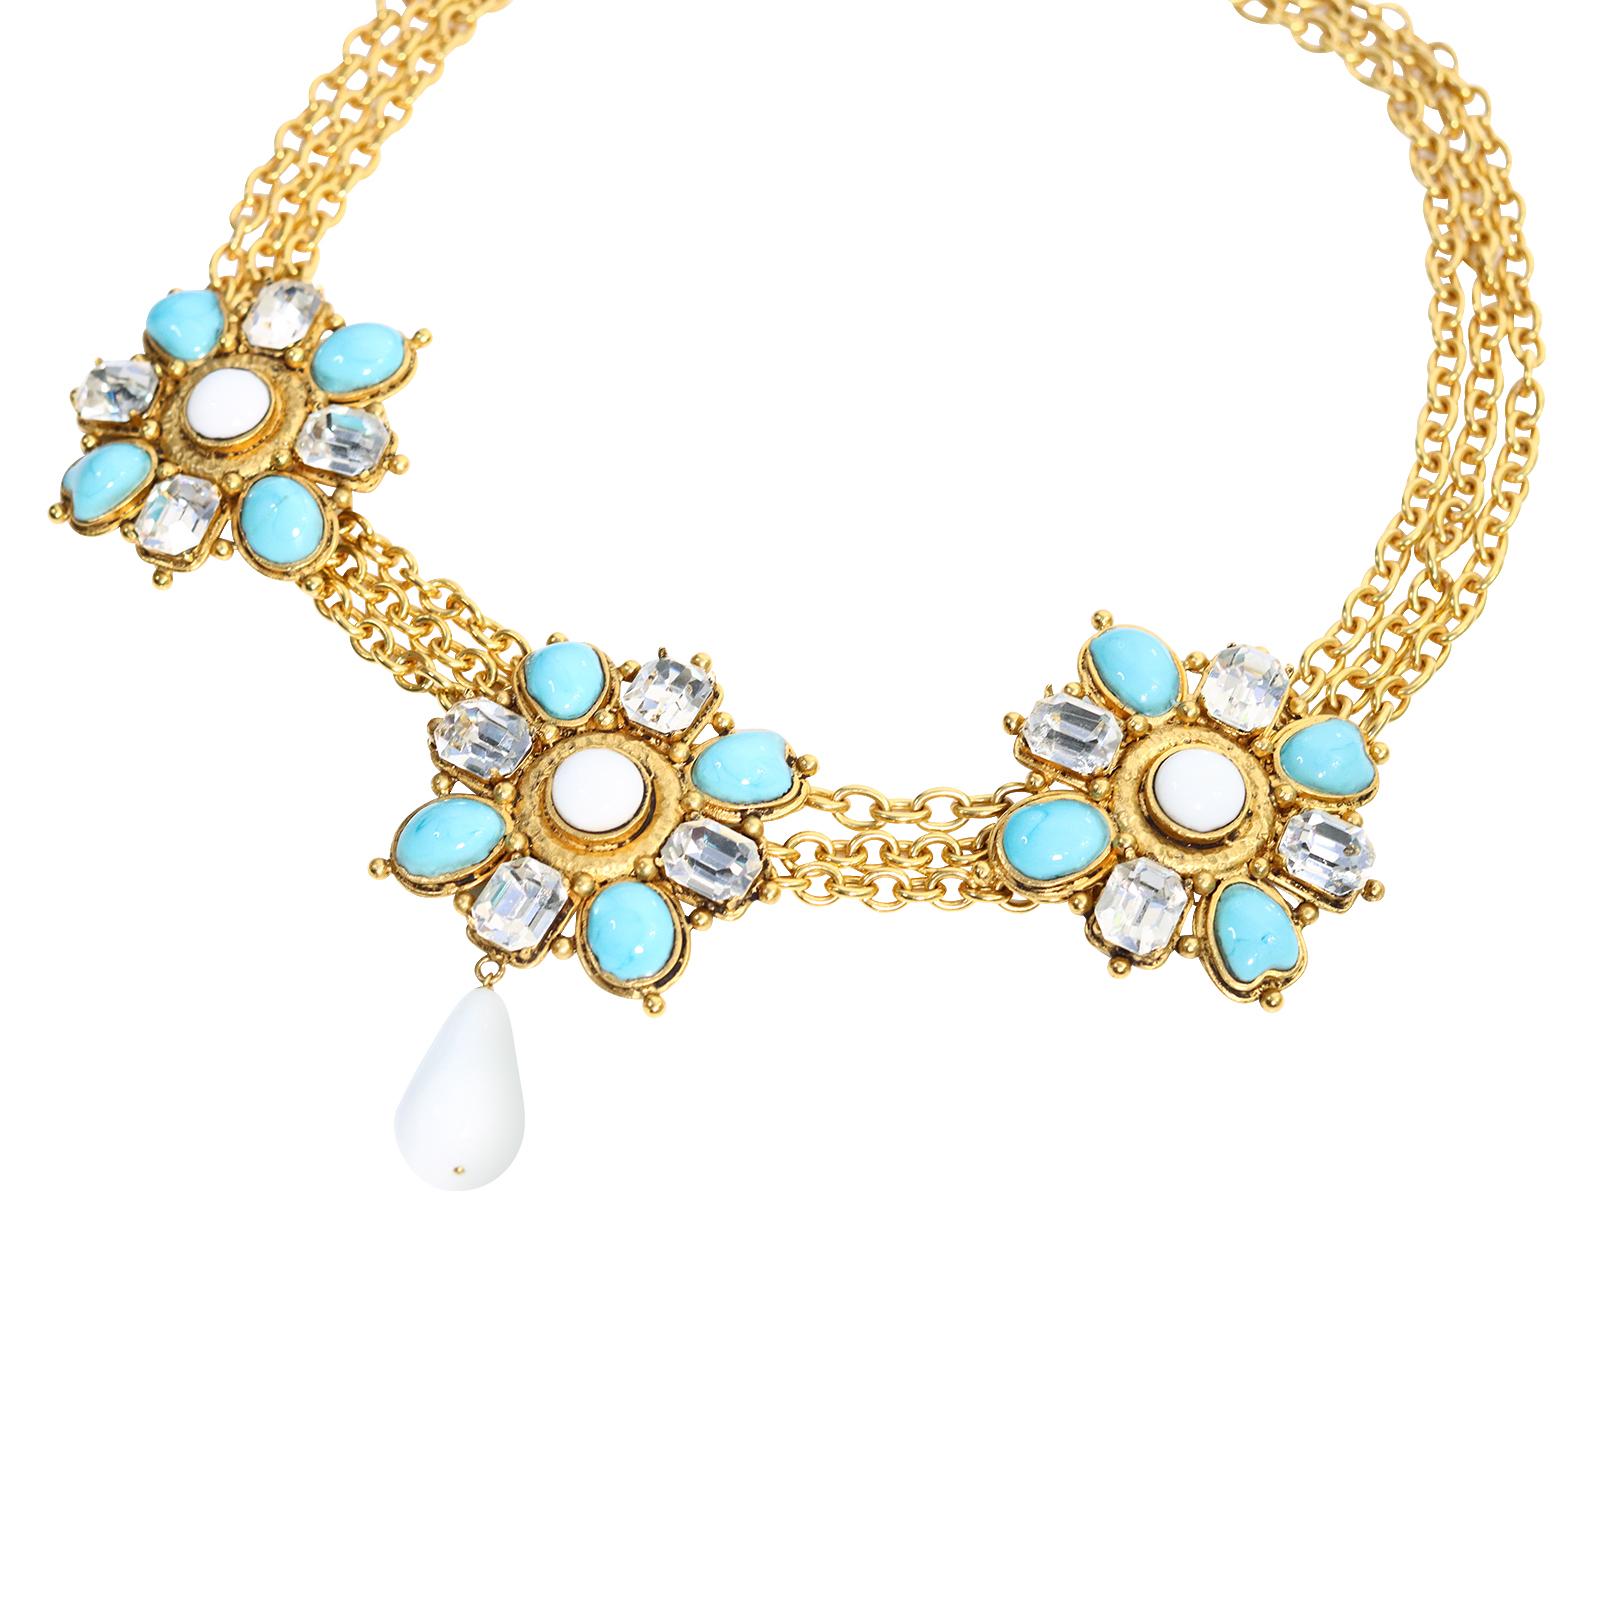 Vintage Maison Gripoix White, Crystal, Faux Turquoise Gold Necklace Circa 1990s In Good Condition For Sale In New York, NY